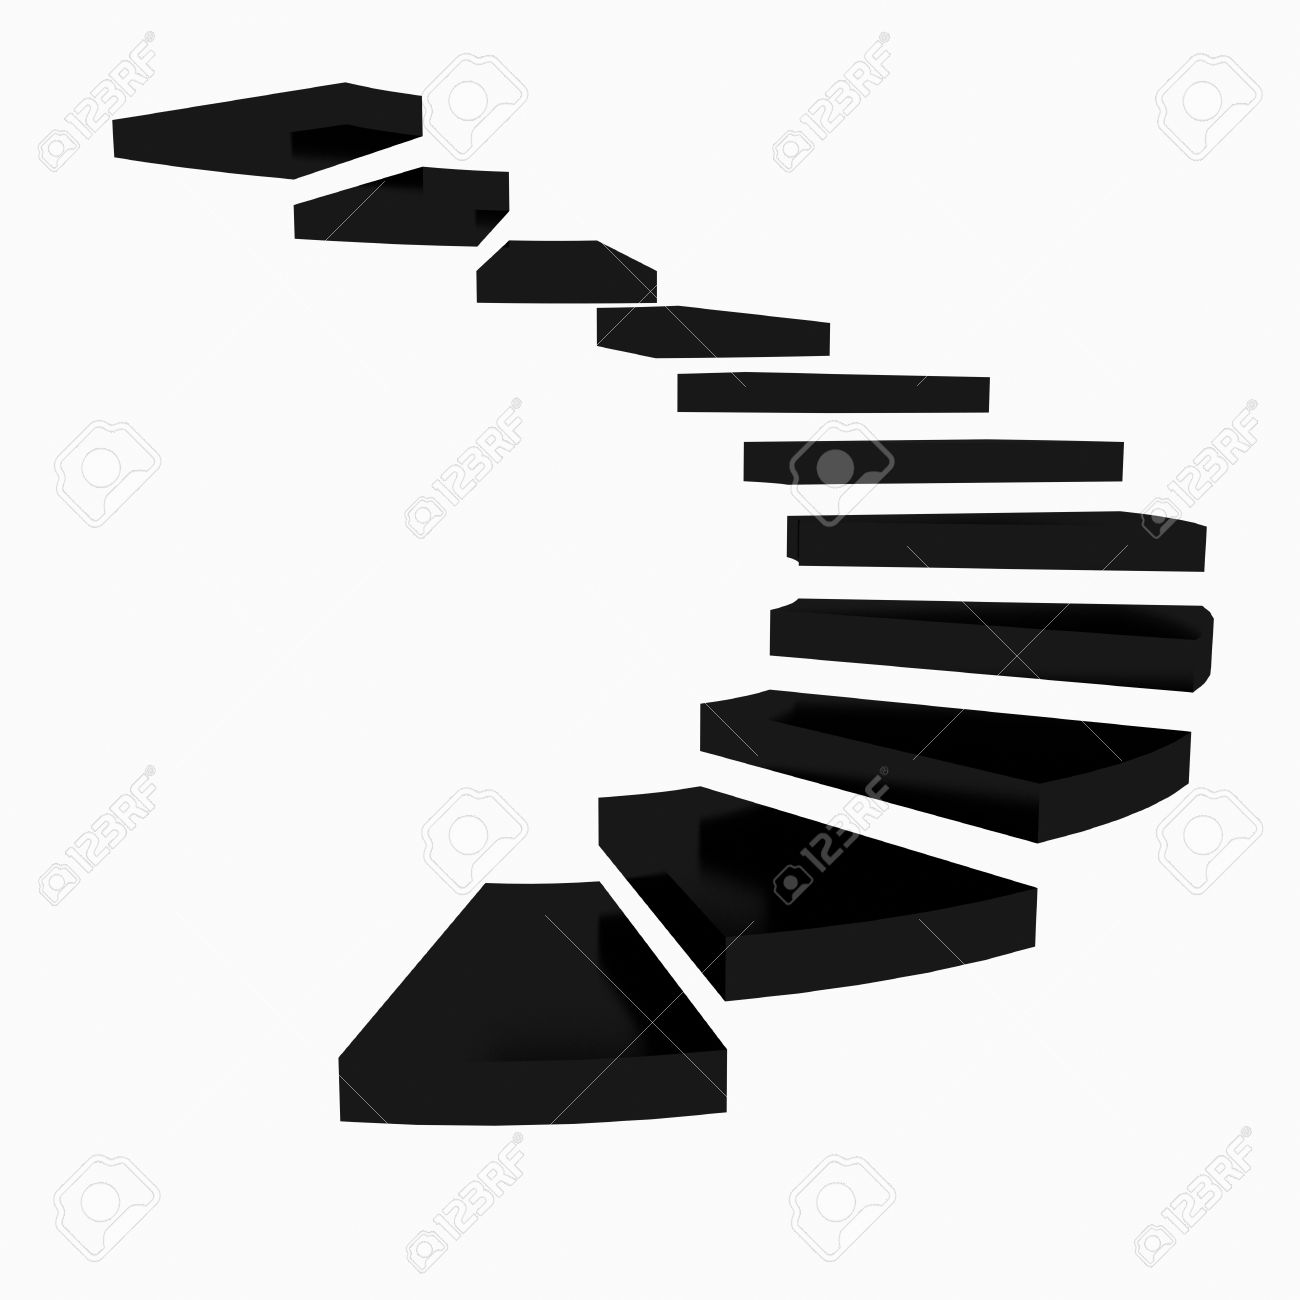 Spiral staircase clipart.